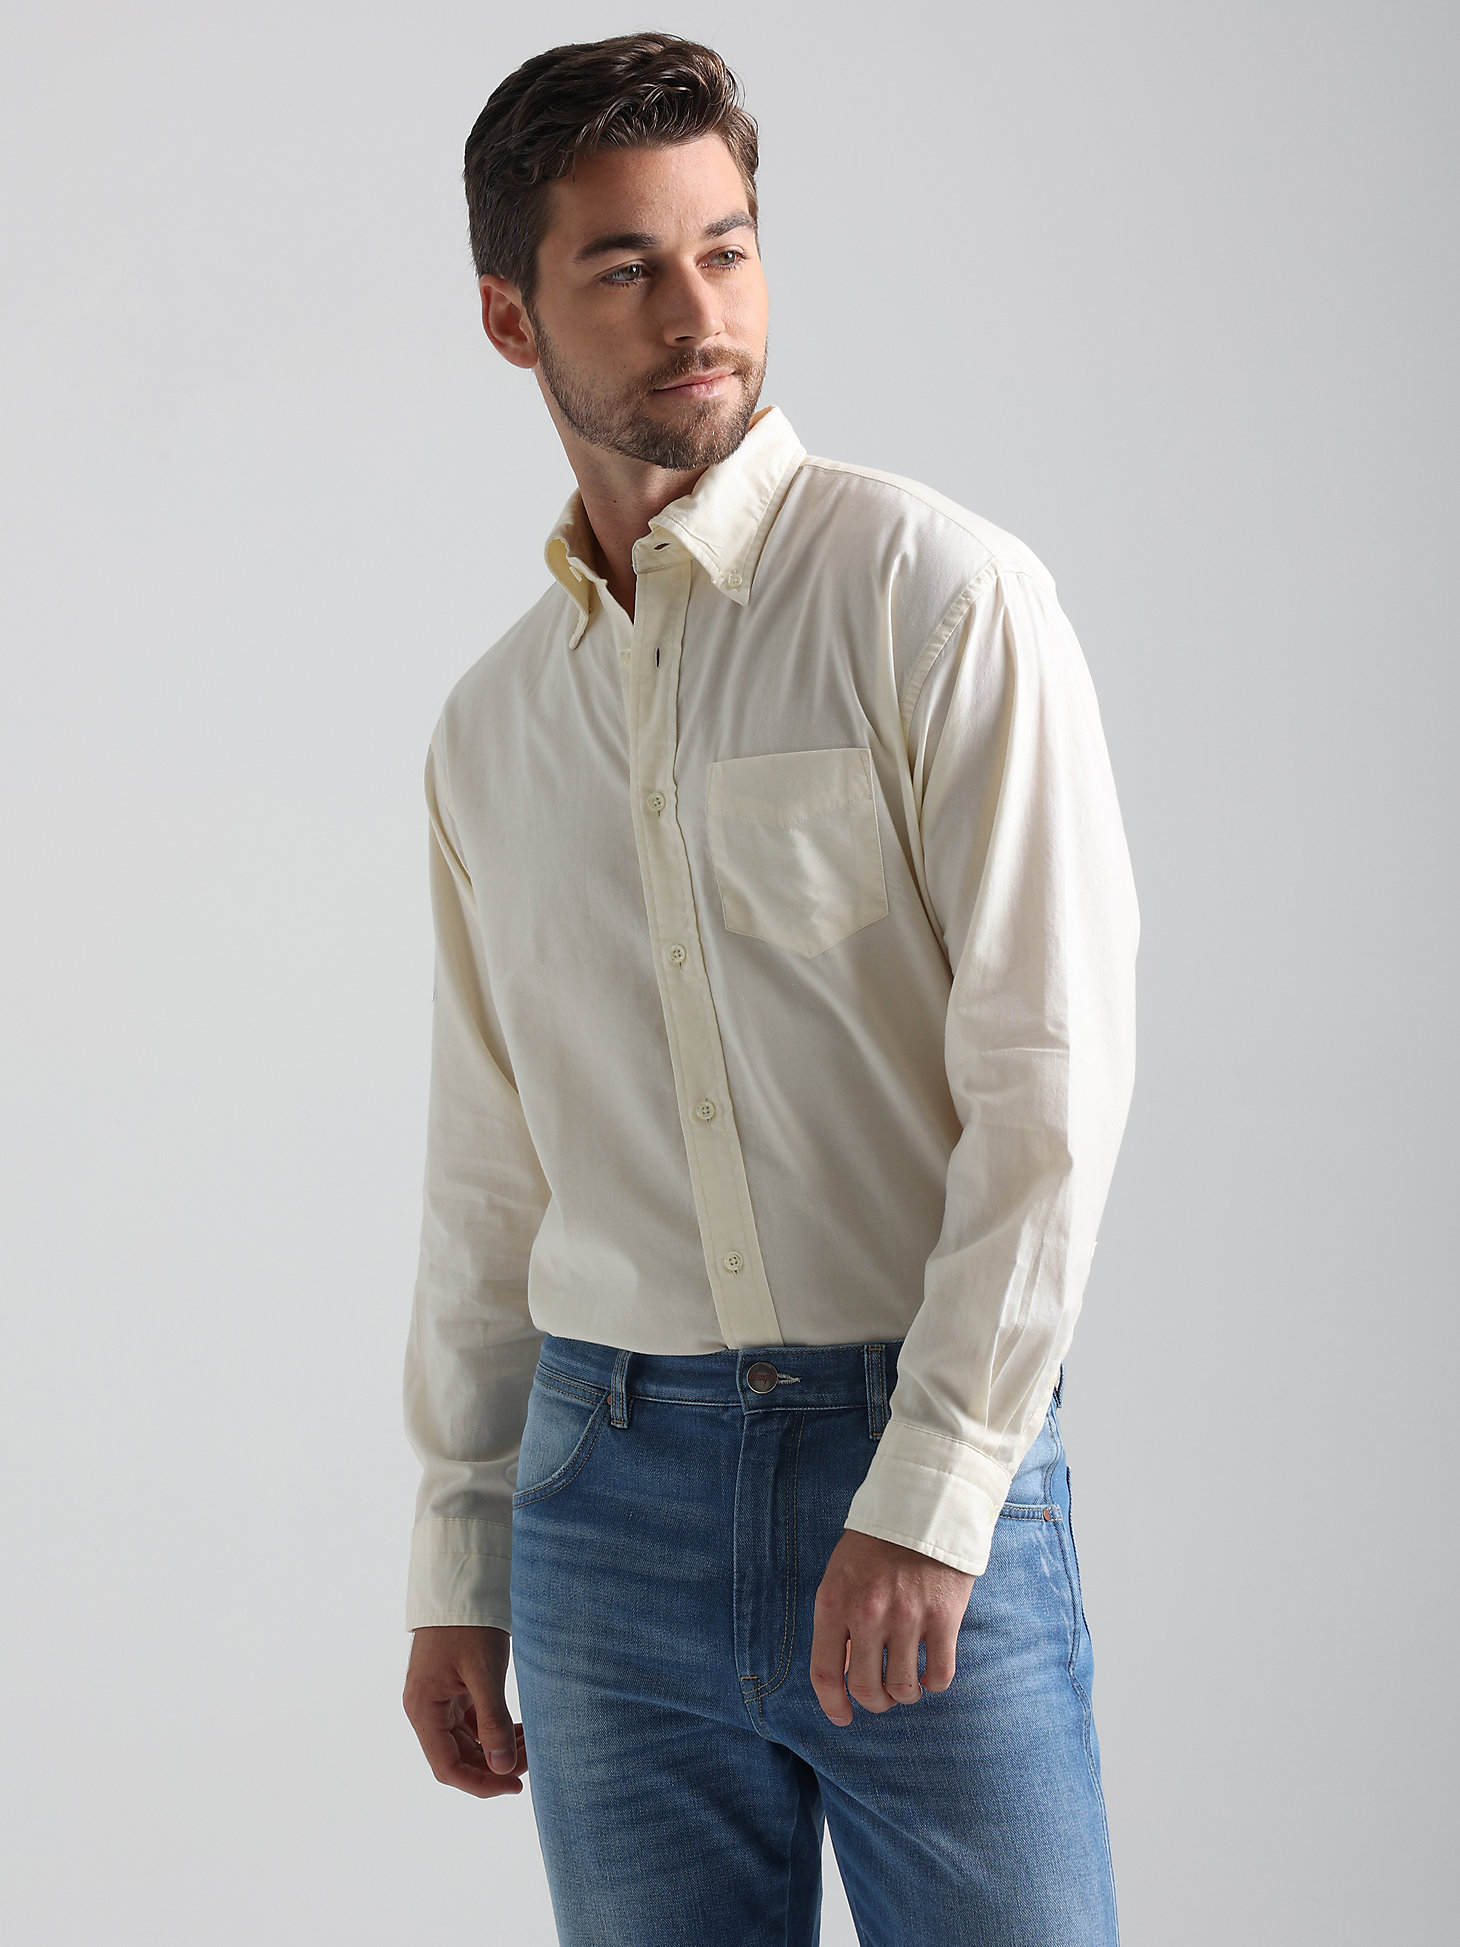 Embroidered Oxford Shirt in Cream alternative view 2